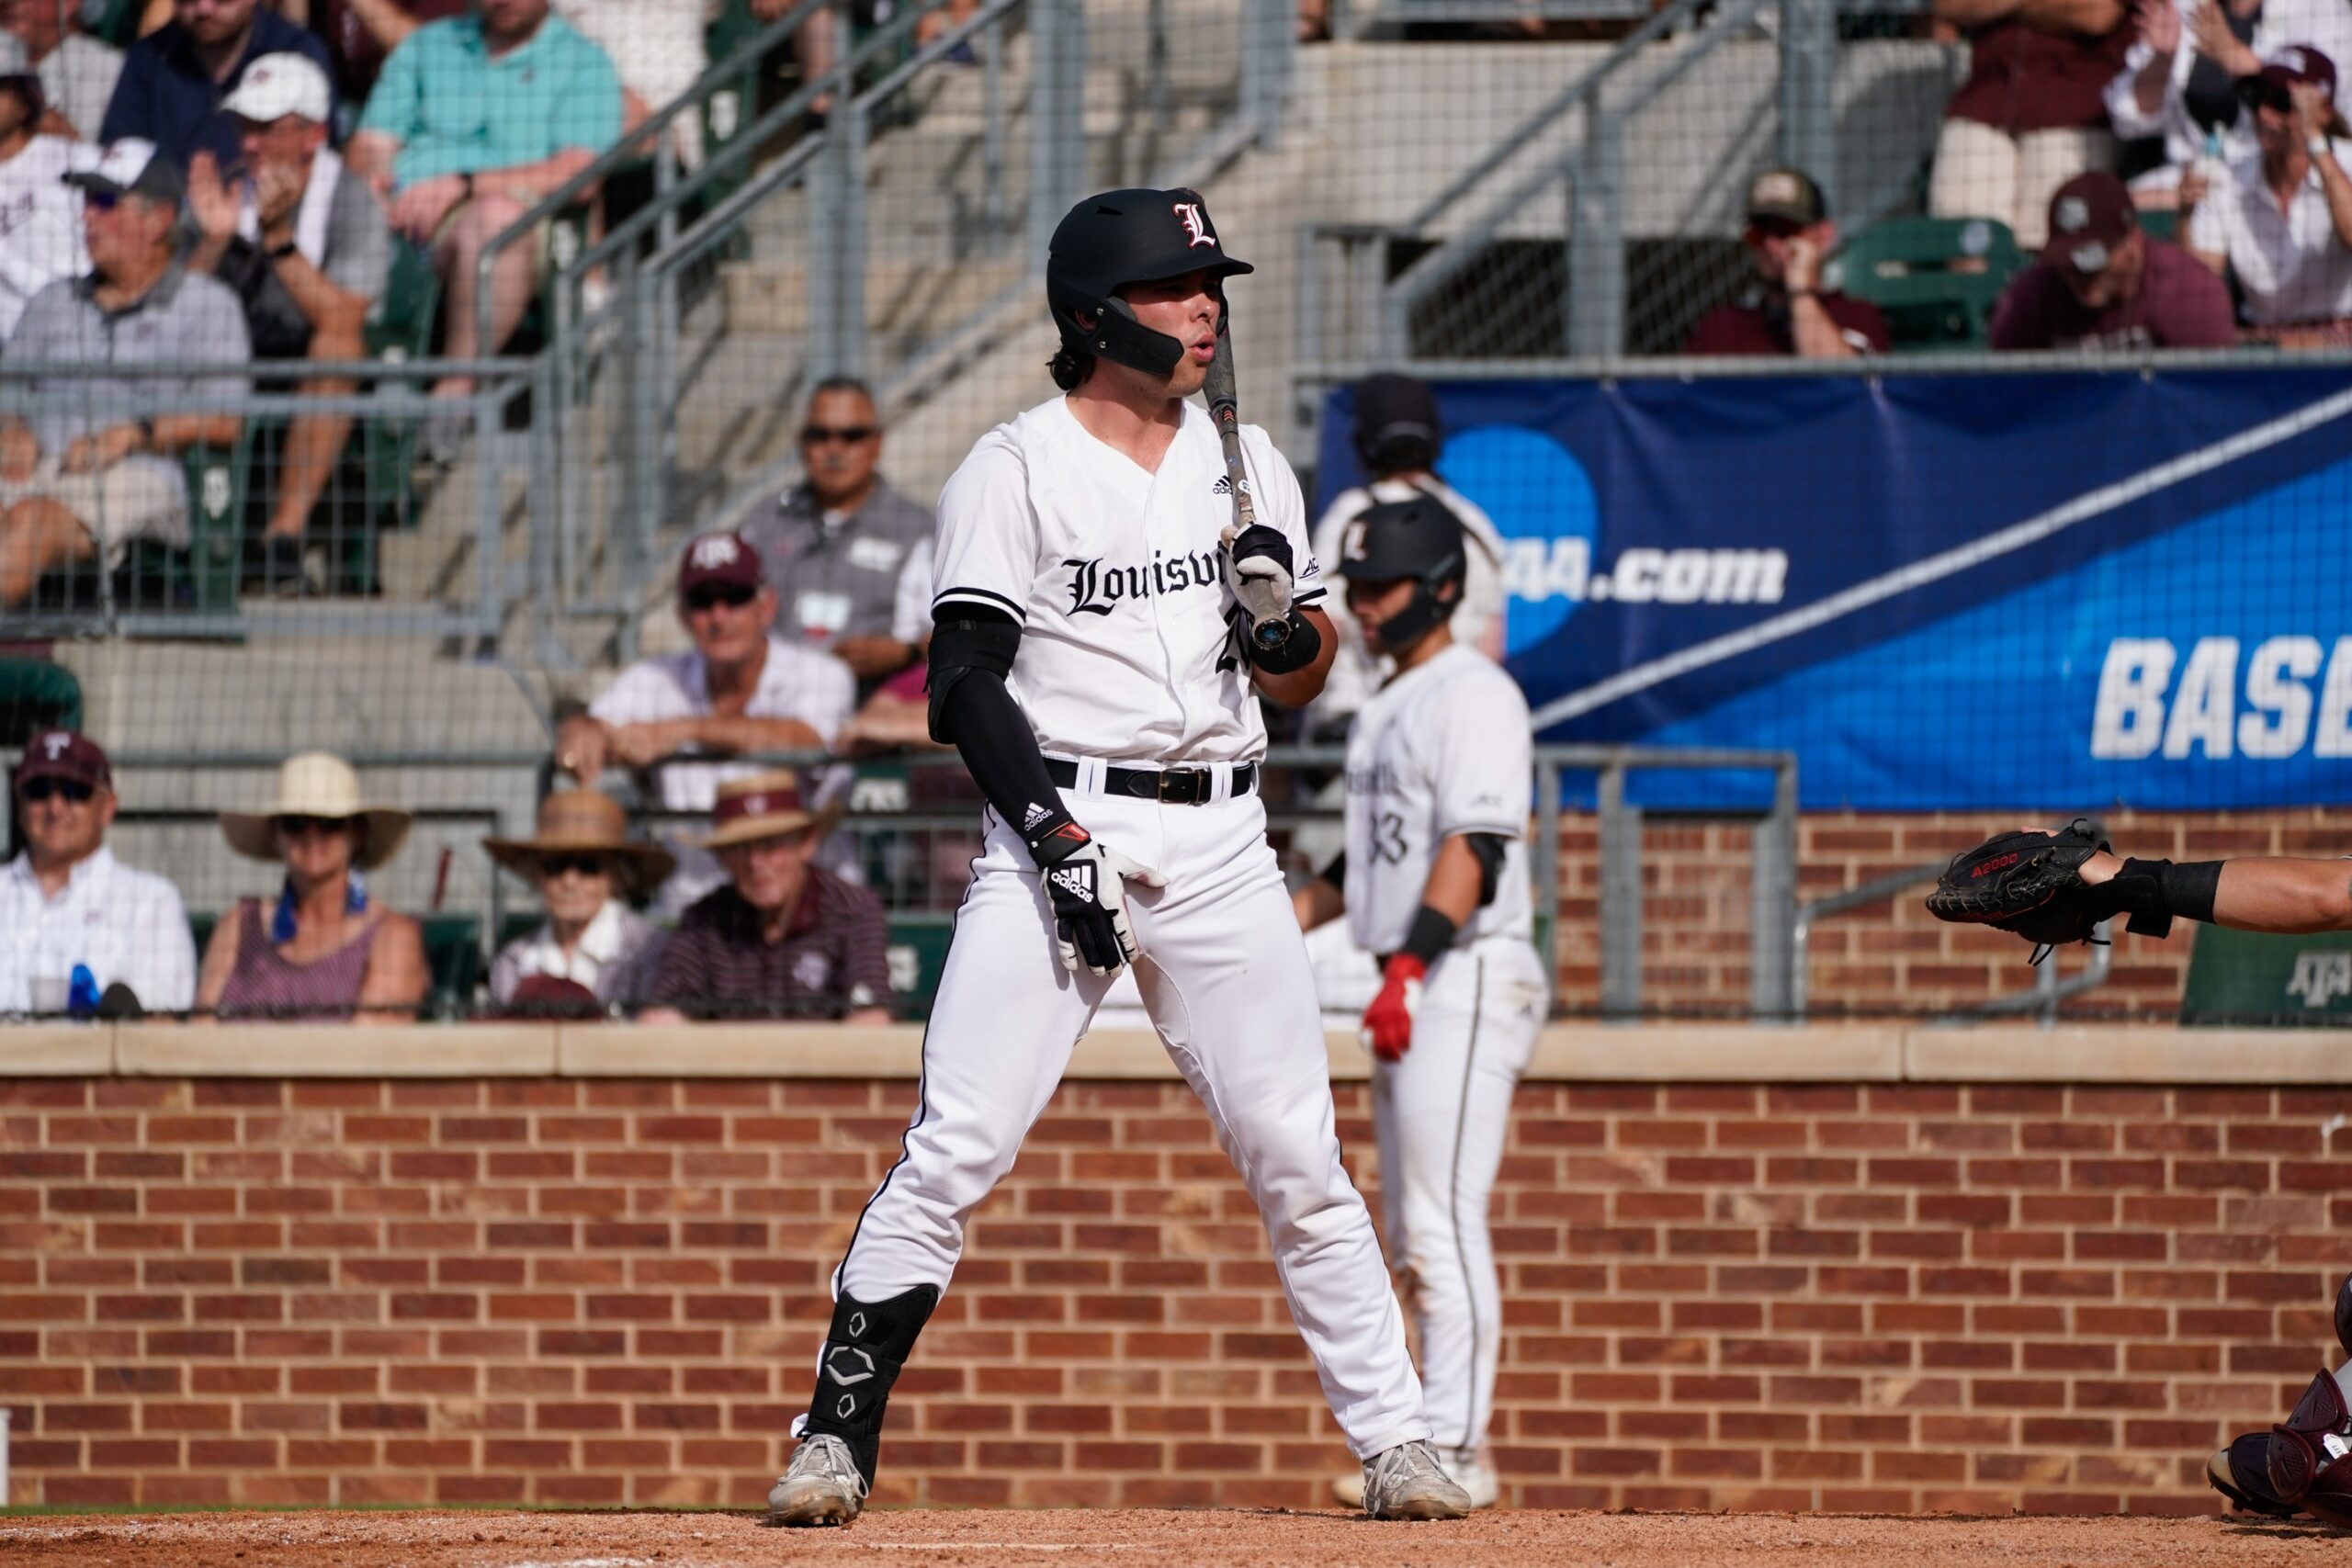 MLB Draft Dodgers Draft Louisville Catcher Dalton Rushing with First